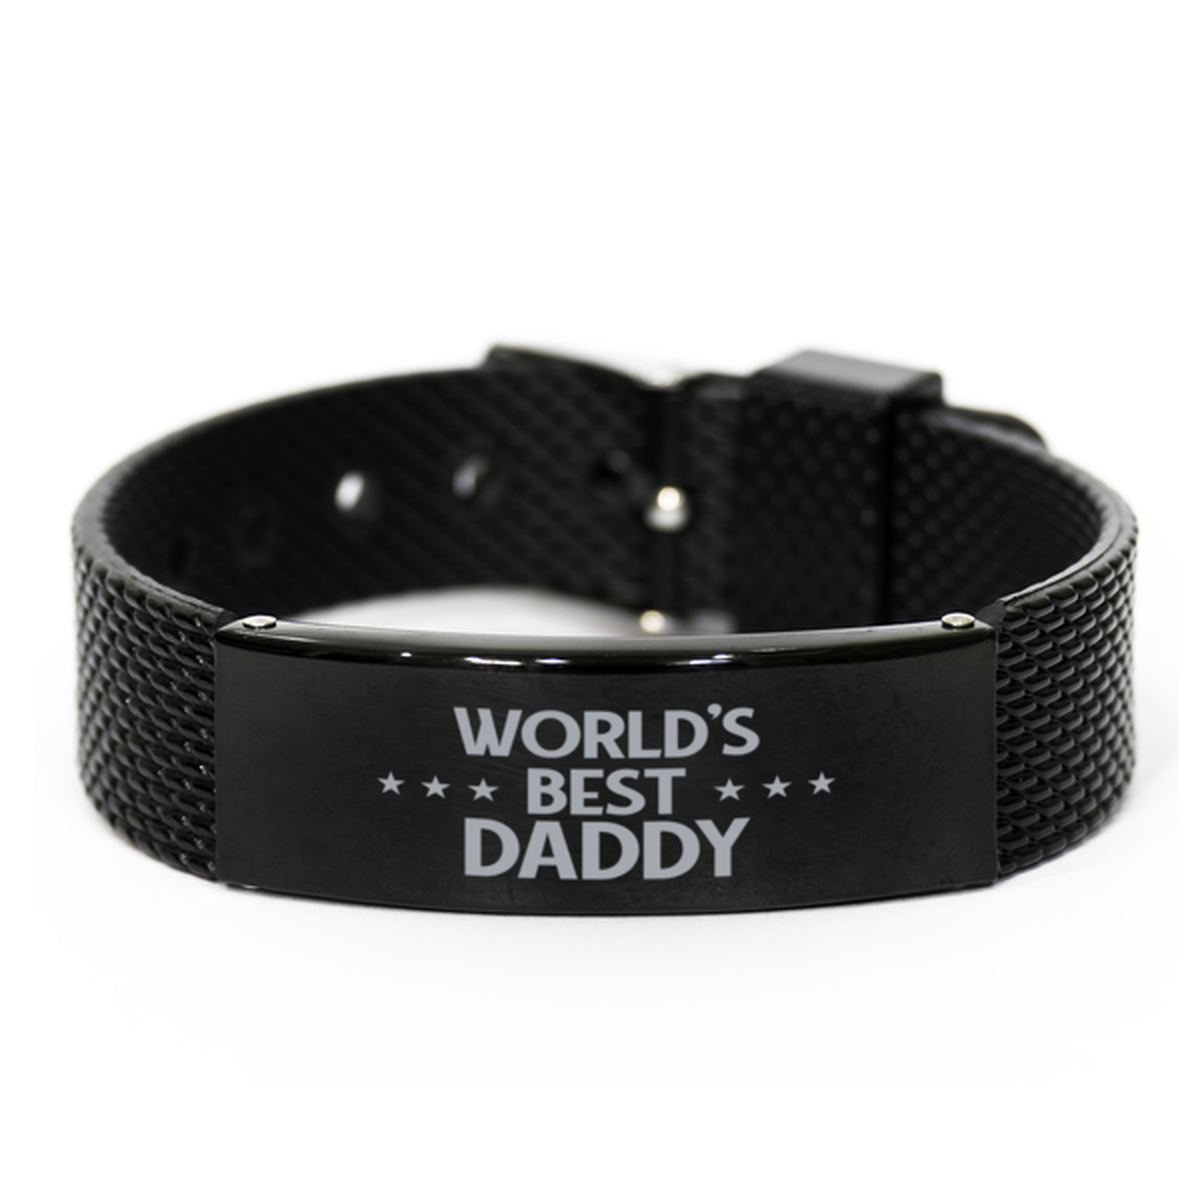 World's Best Daddy Gifts, Gag Engraved Bracelet For Daddy, Best Family Gifts For Men